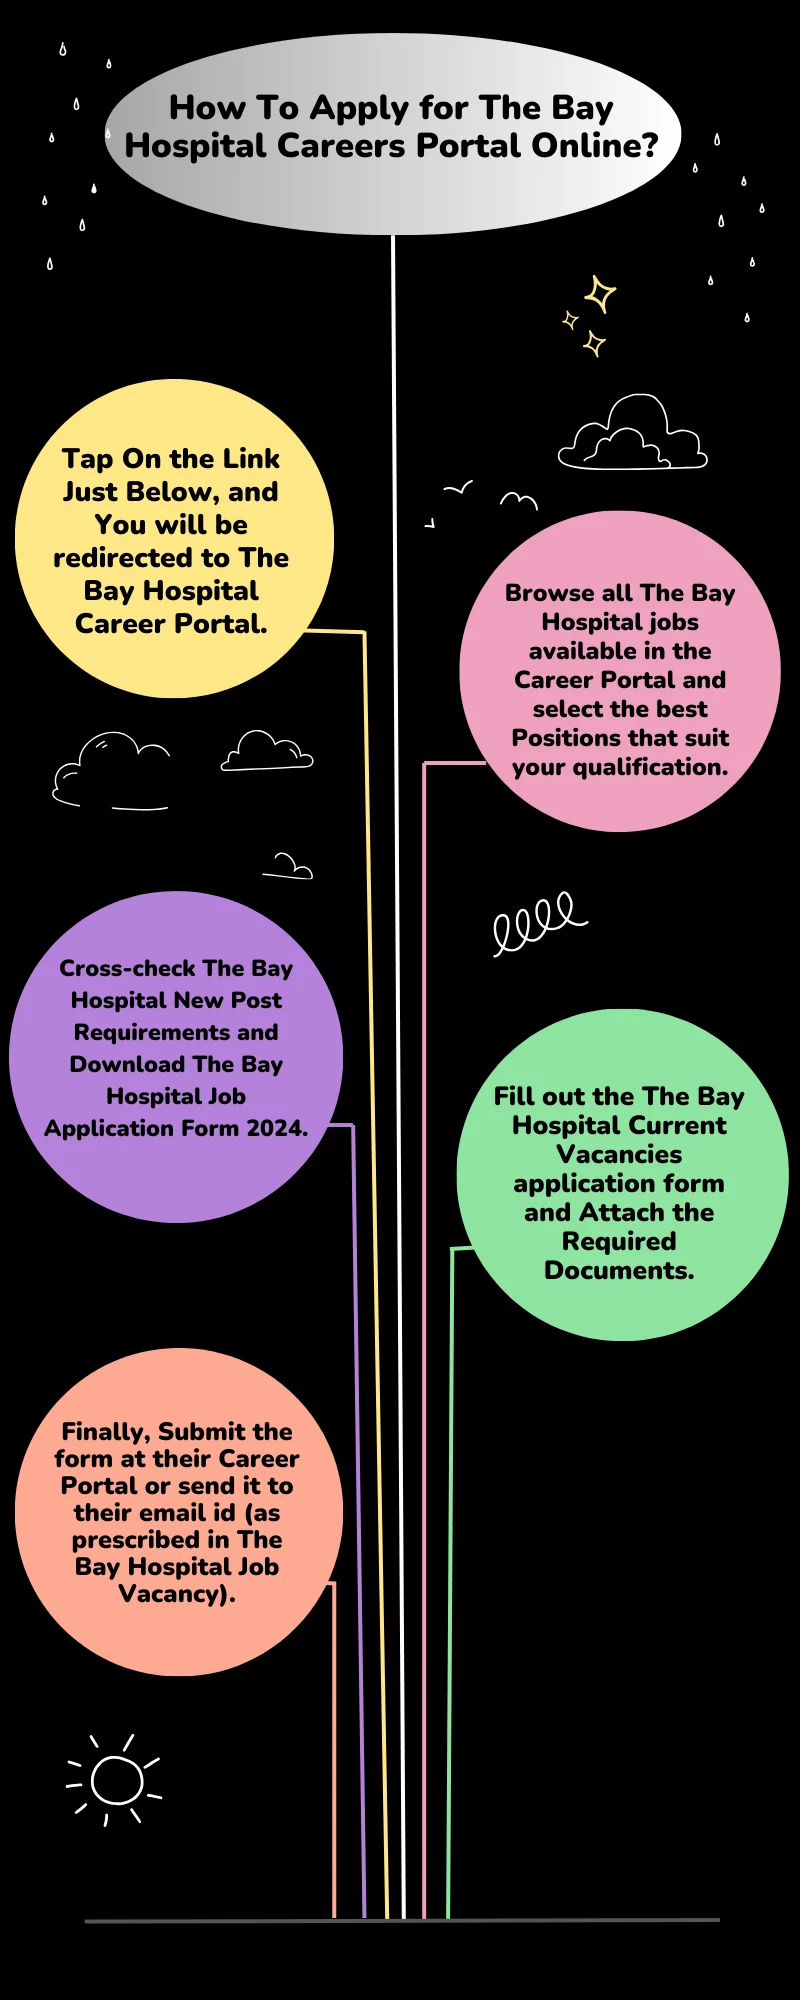 How To Apply for The Bay Hospital Careers Portal Online?